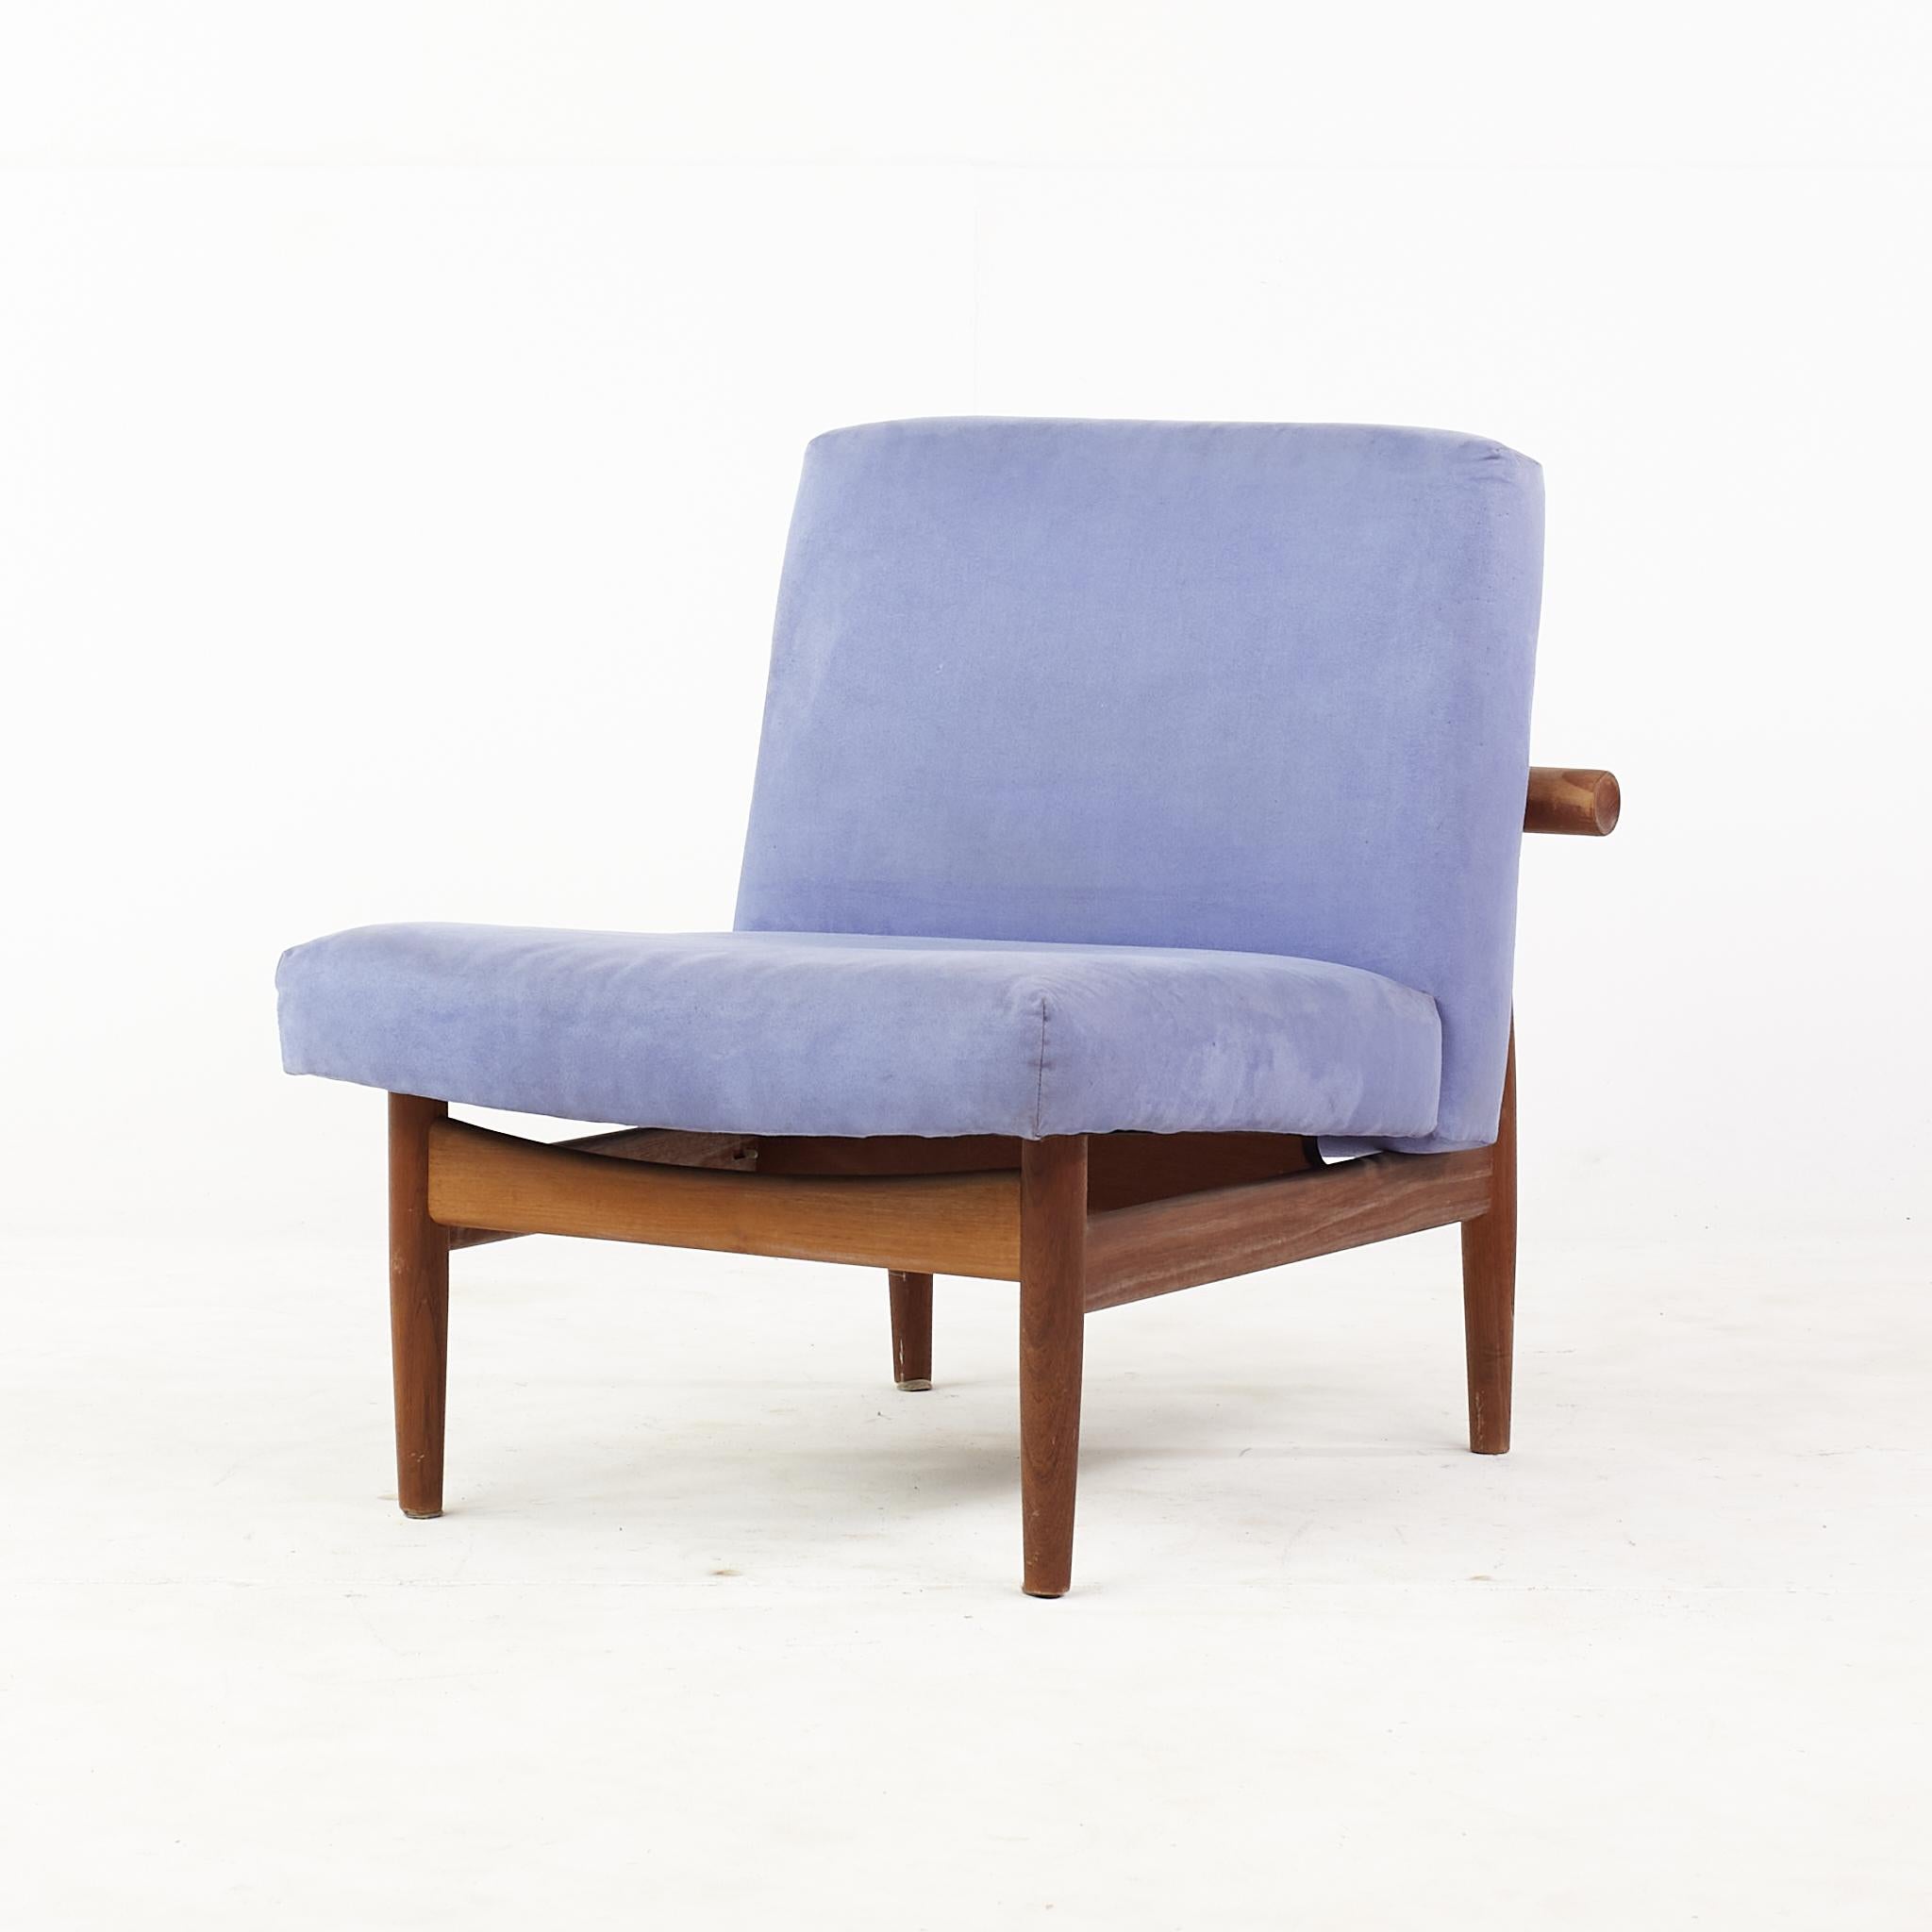 Finn Juhlmid century japan lounge chair

This chair measures: 26.5 wide x 33.5 deep x 28 inches high, with a seat height/chair clearance of 15.75 inches

All pieces of furniture can be had in what we call restored vintage condition. That means the